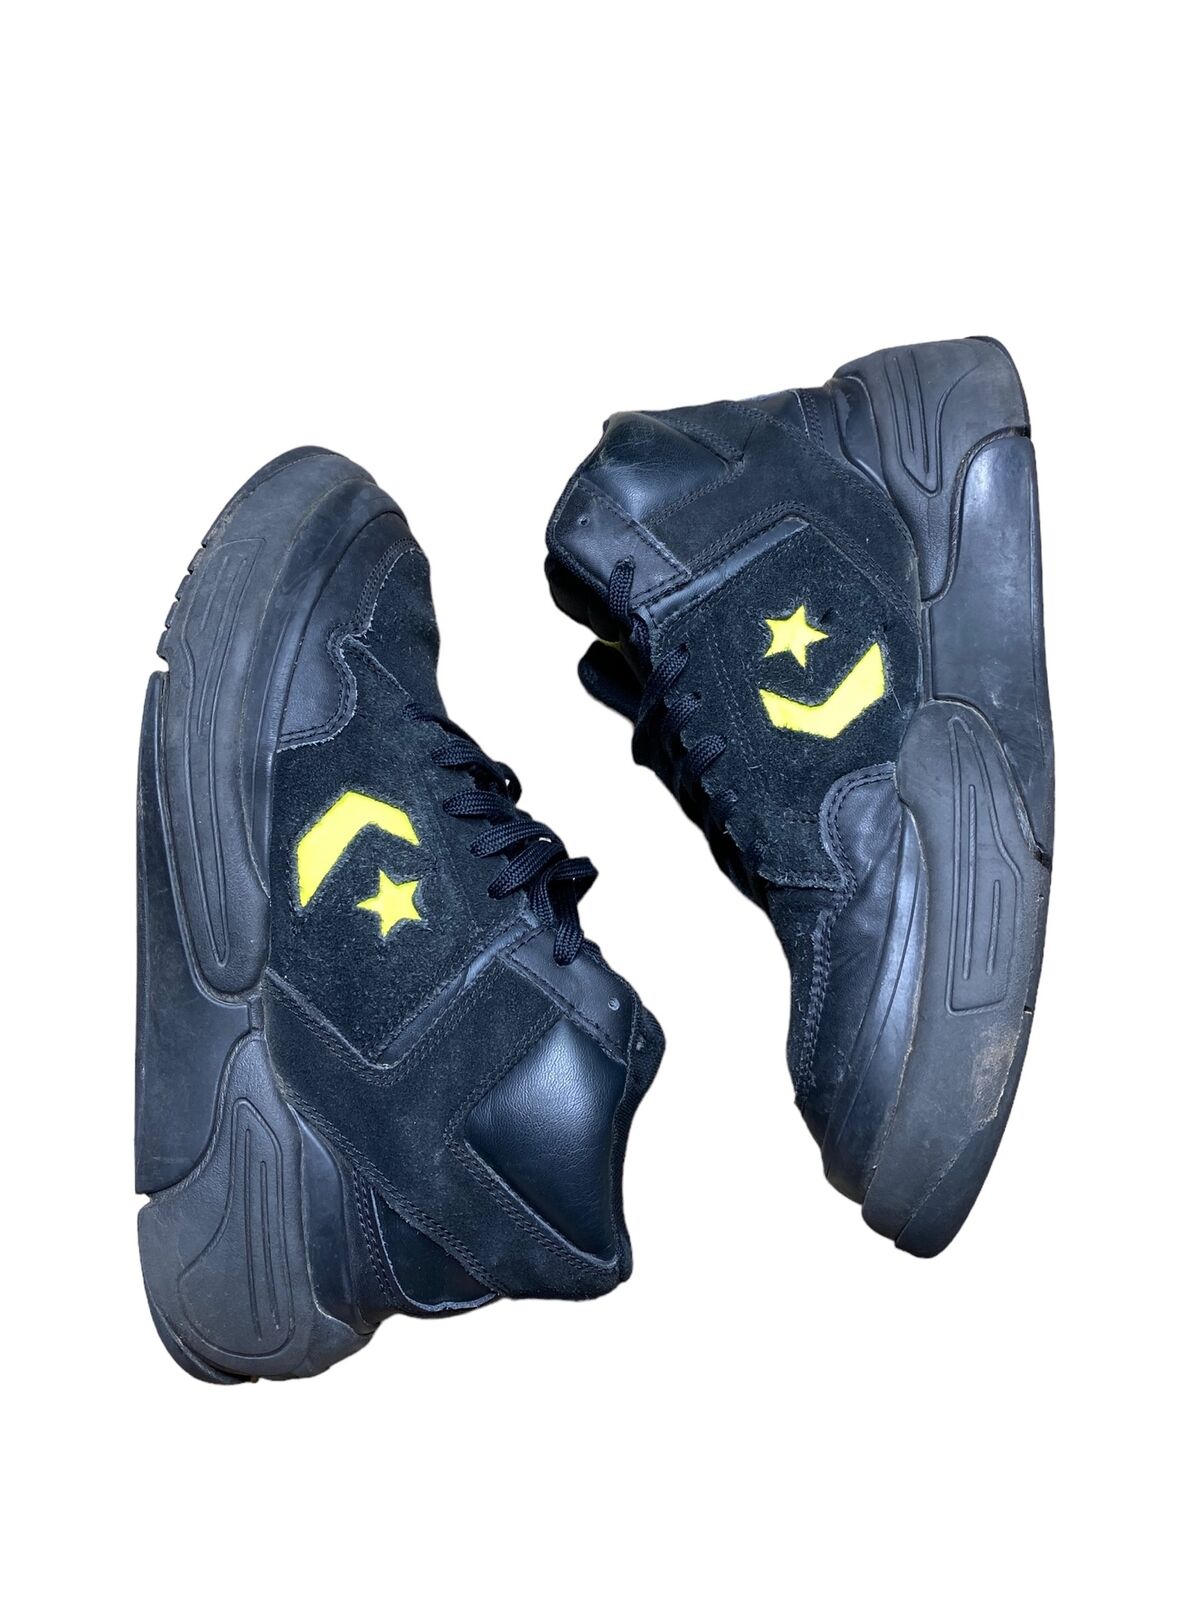 Converse Weapon Cx Mid All Star Black Yellow Snea… - image 2